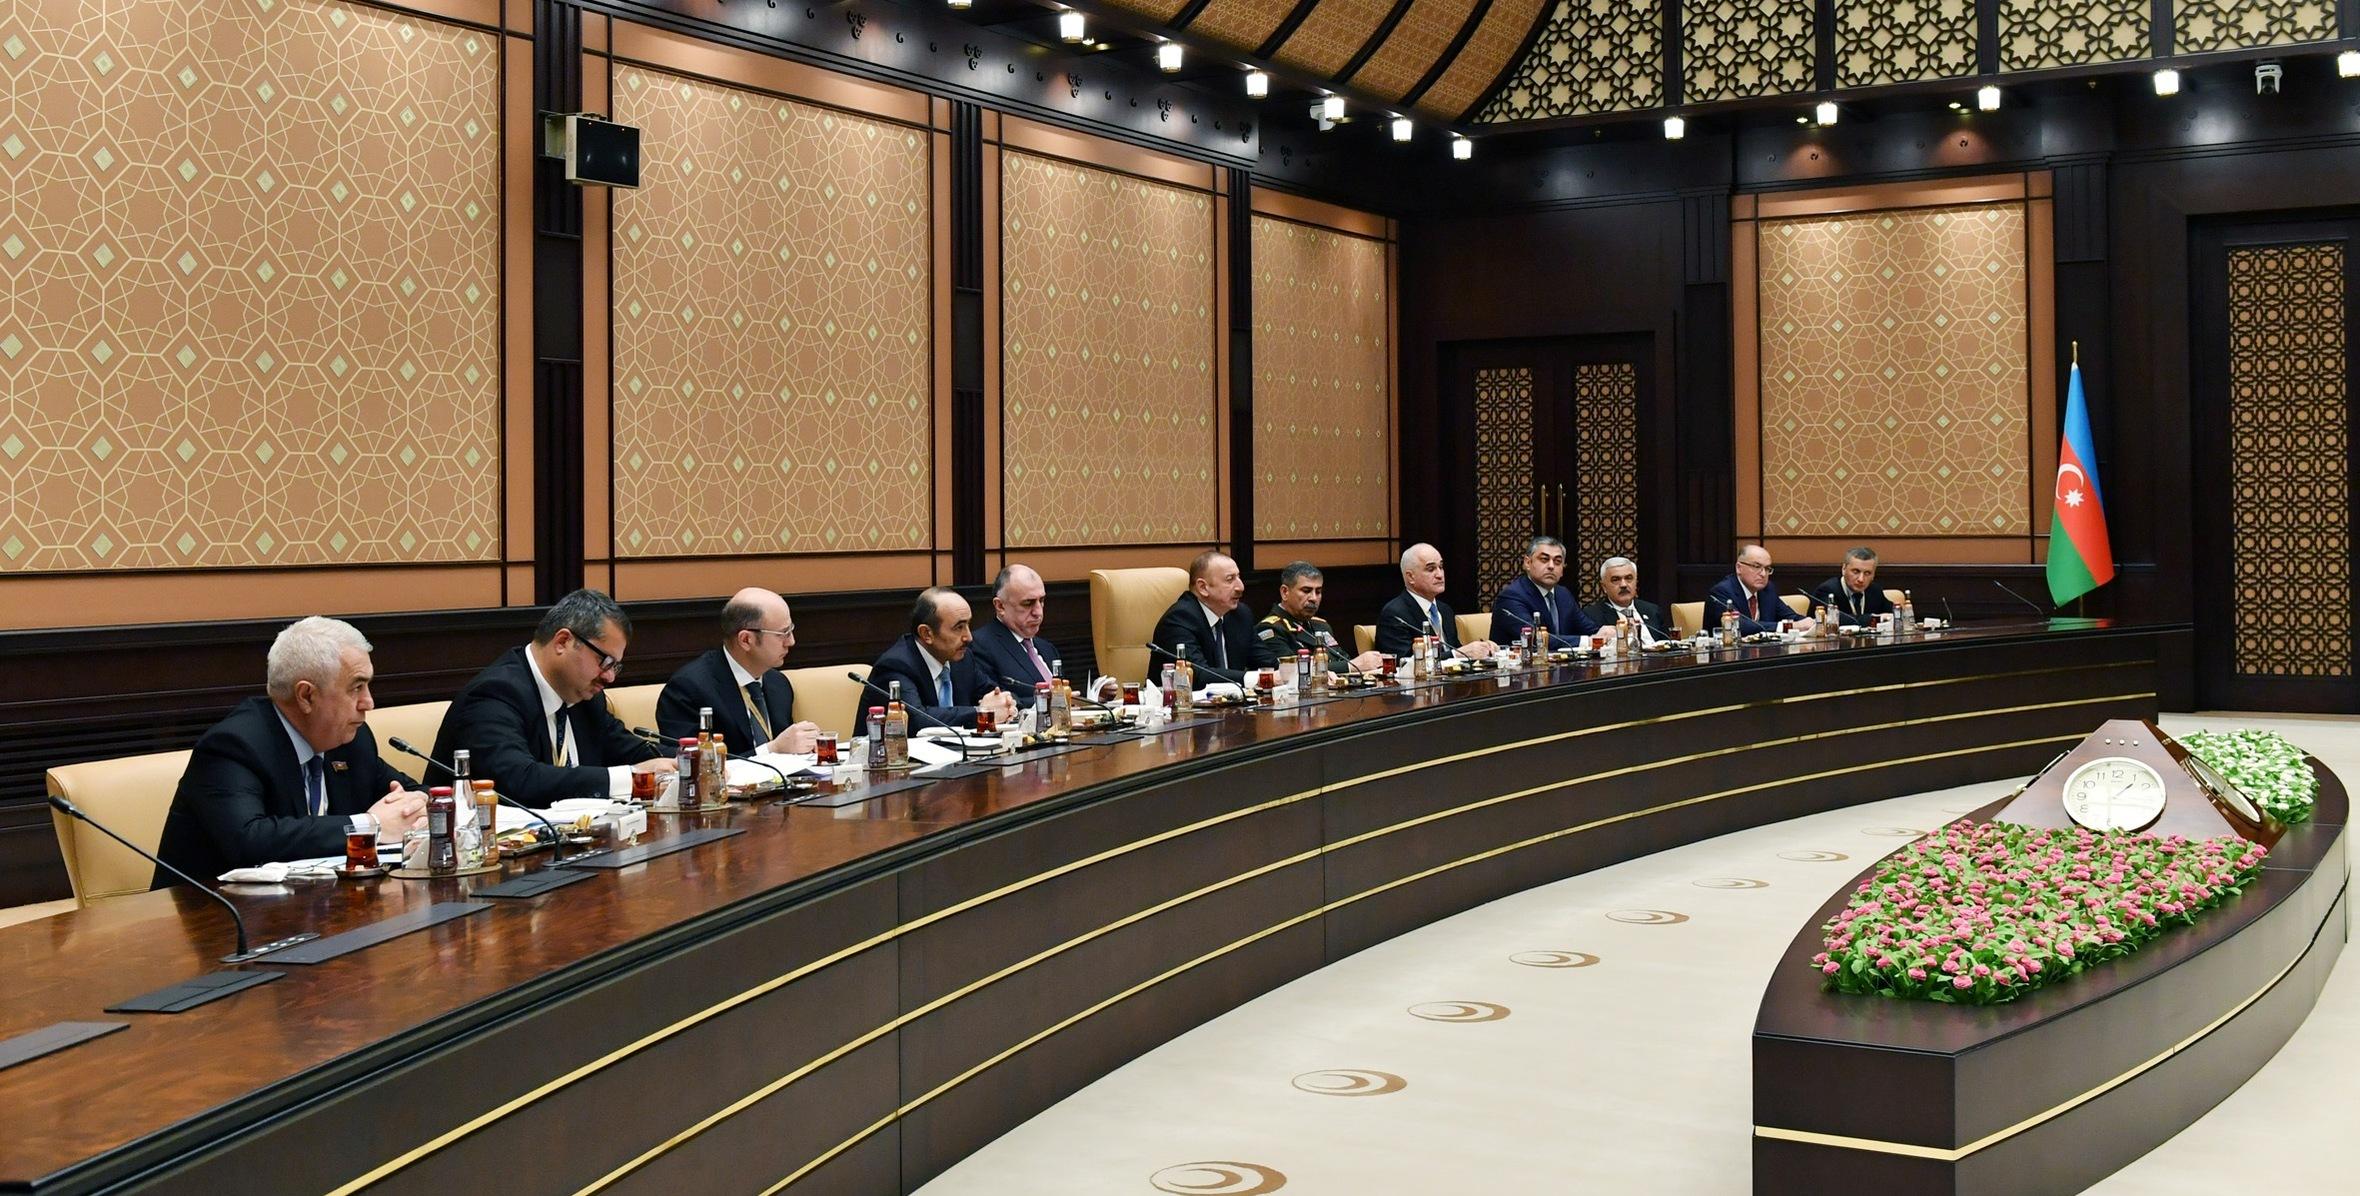 Speech by Ilham Aliyev at the Seventh meeting of Azerbaijan-Turkey High-Level Strategic Cooperation Council